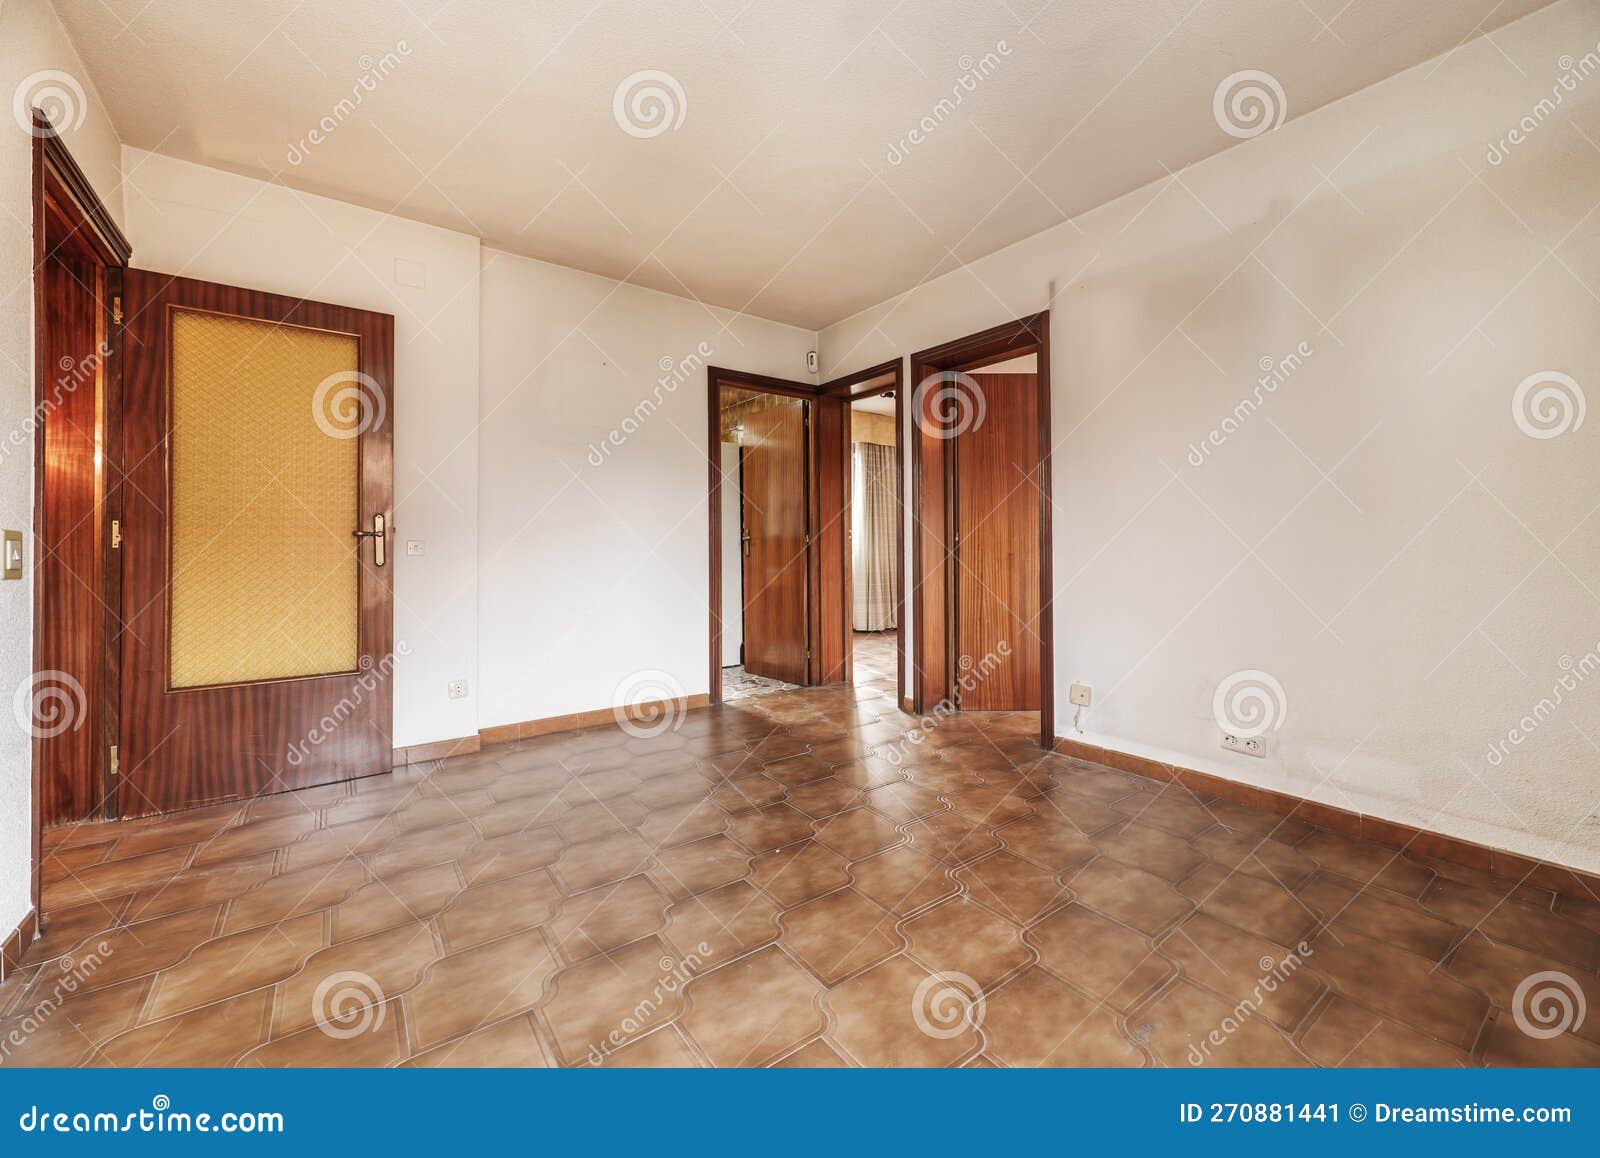 living room of an empty apartment with cheap dark wood carpentry and brown tile floors